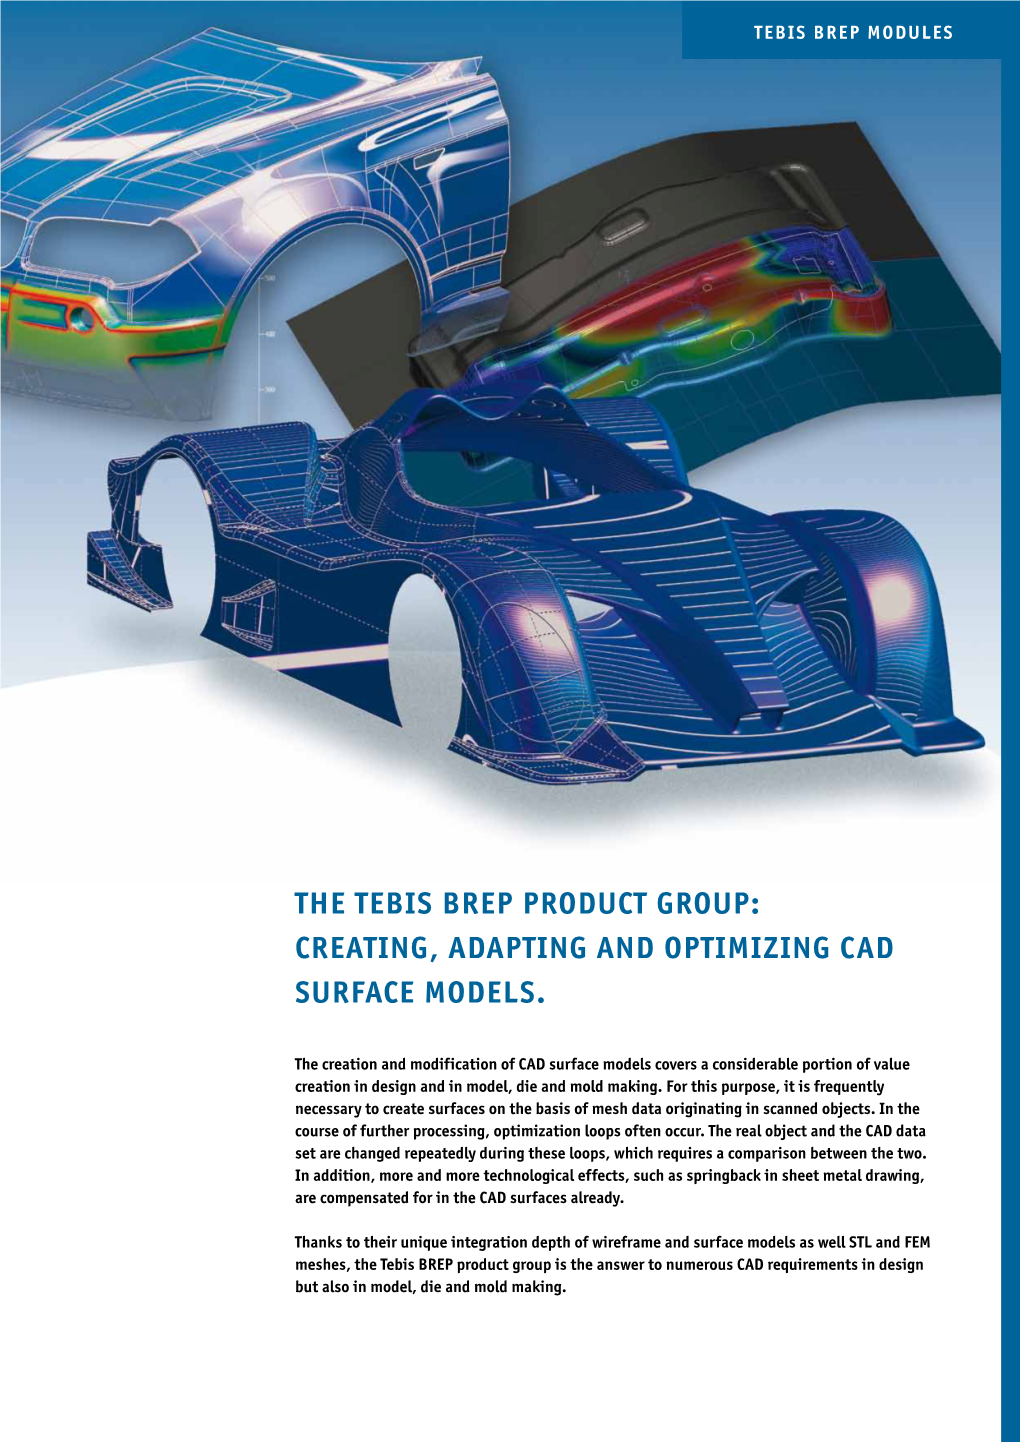 The Tebis BREP Product Group: Creating, ADAPTING and OPTIMIZING CAD Surface Models